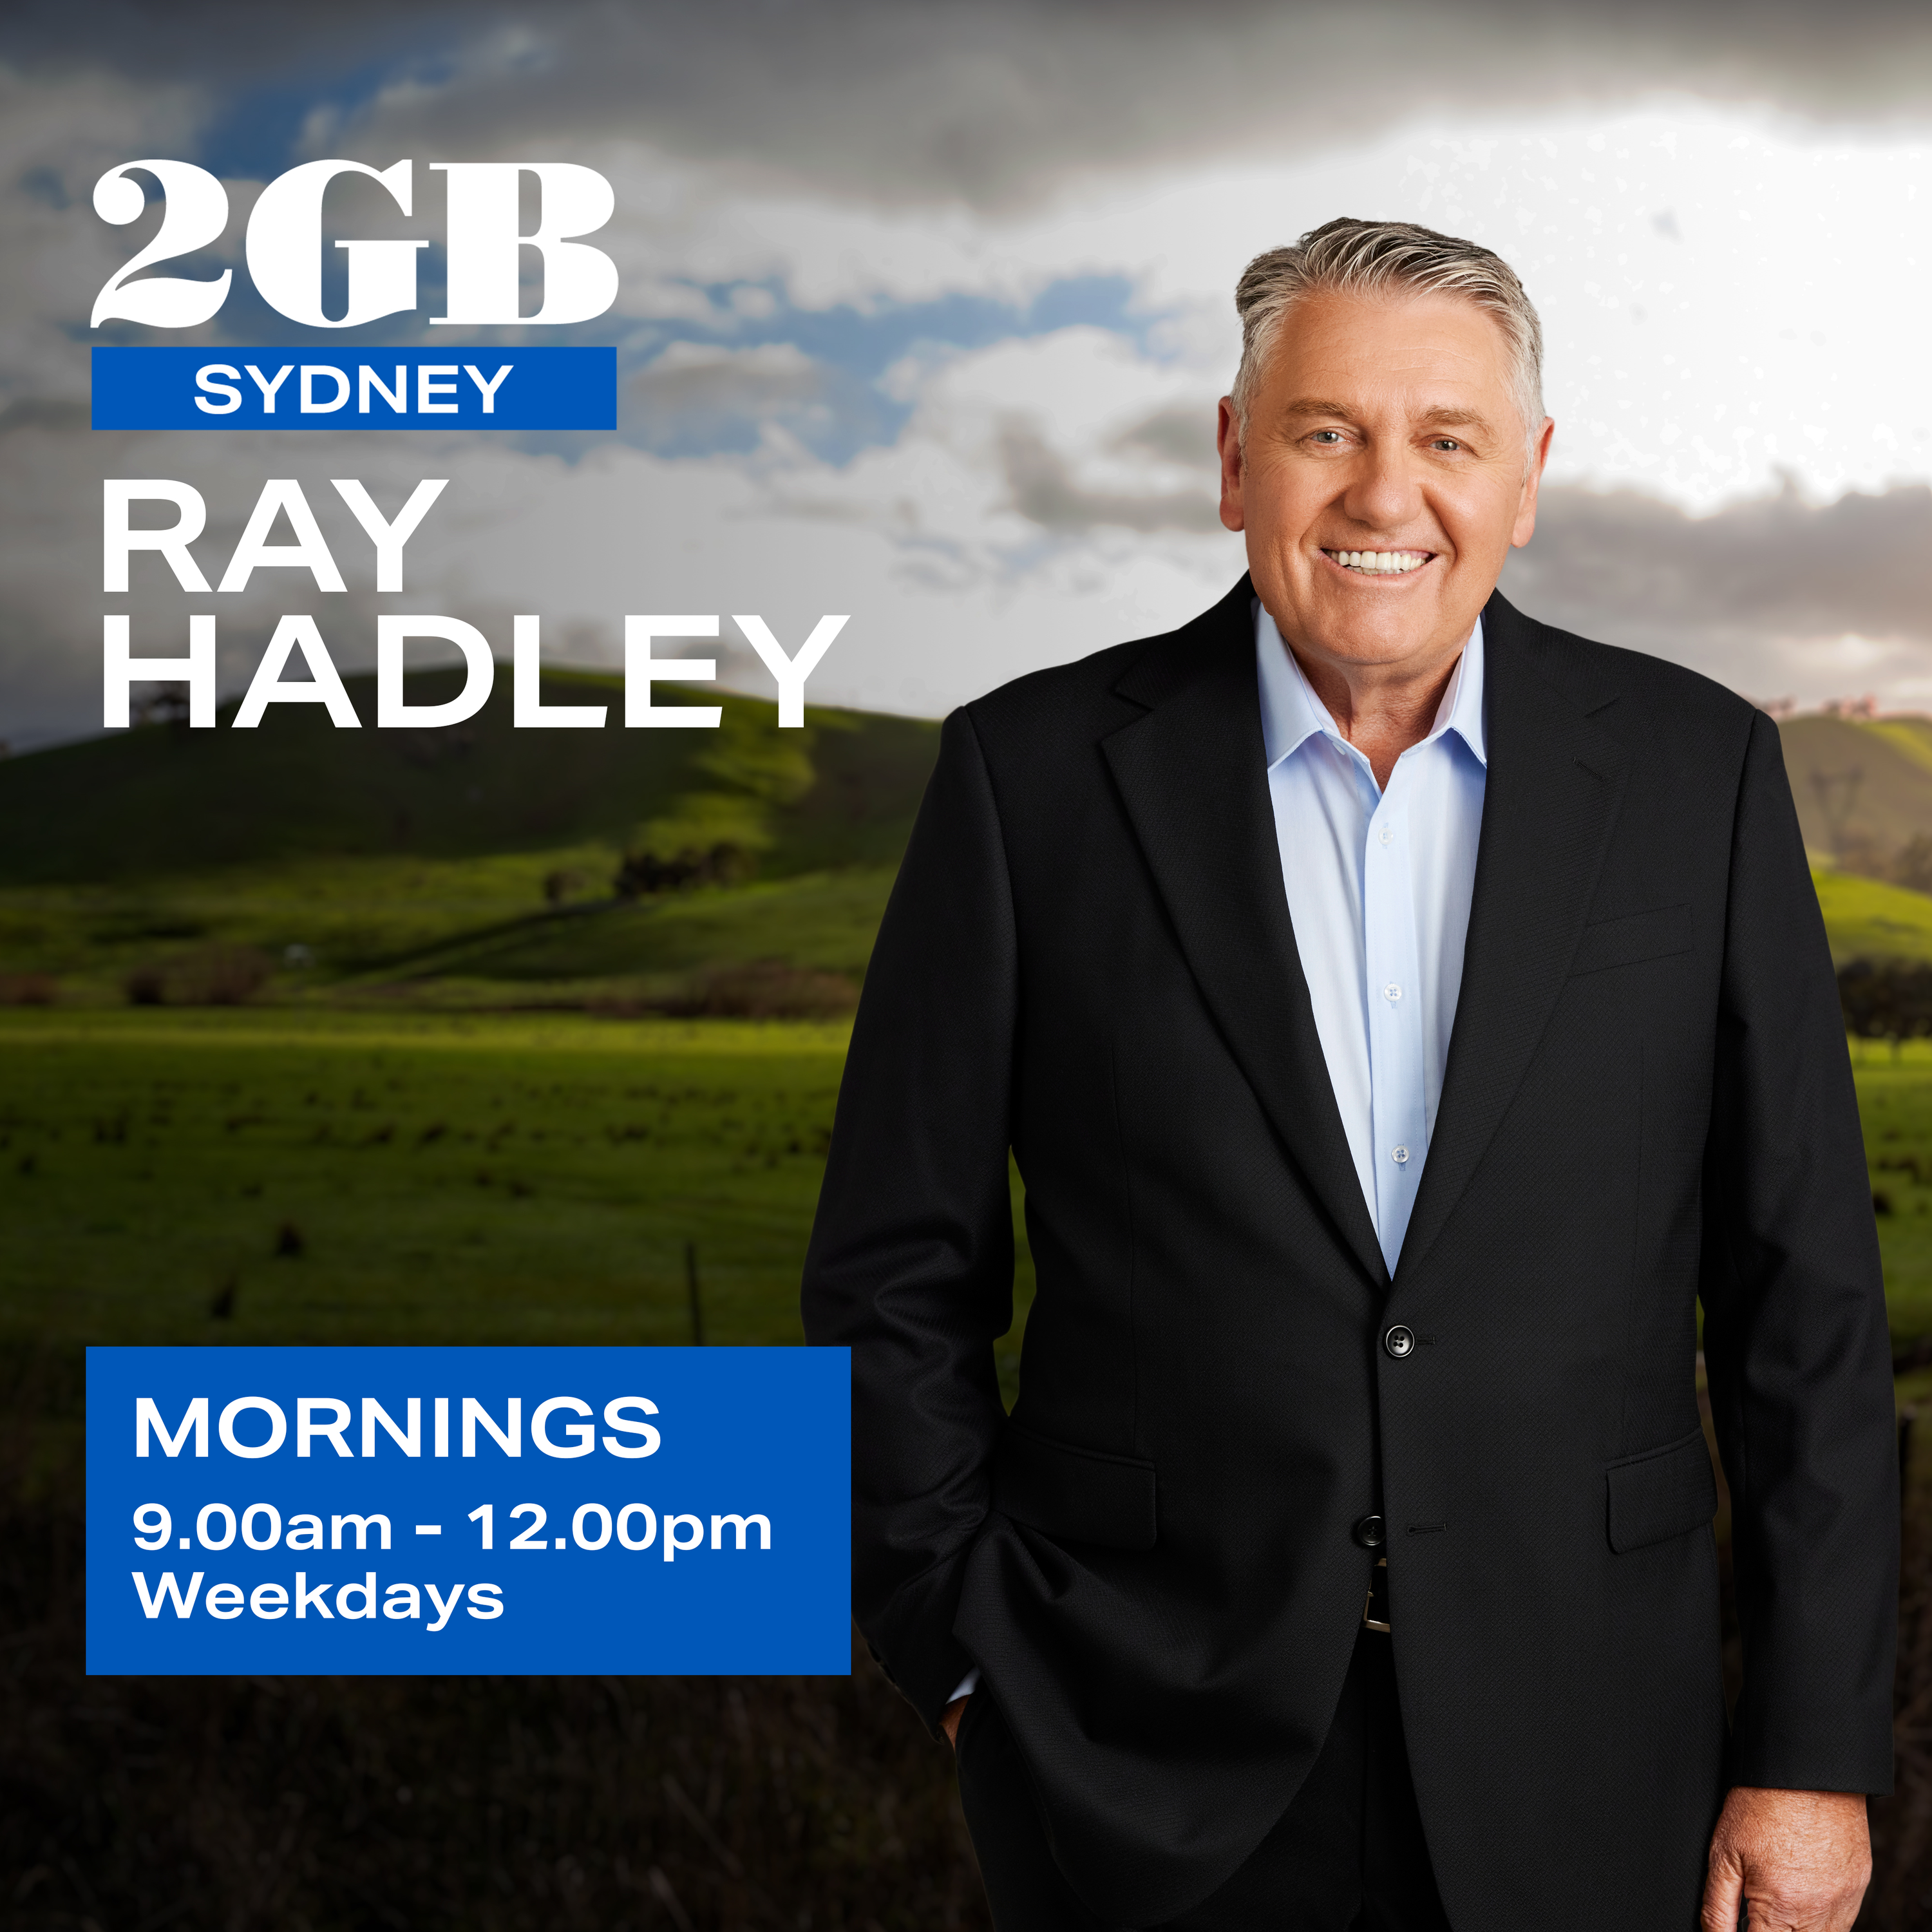 Ray Hadley’s Valentine’s Day message to Fitzy and Wippa